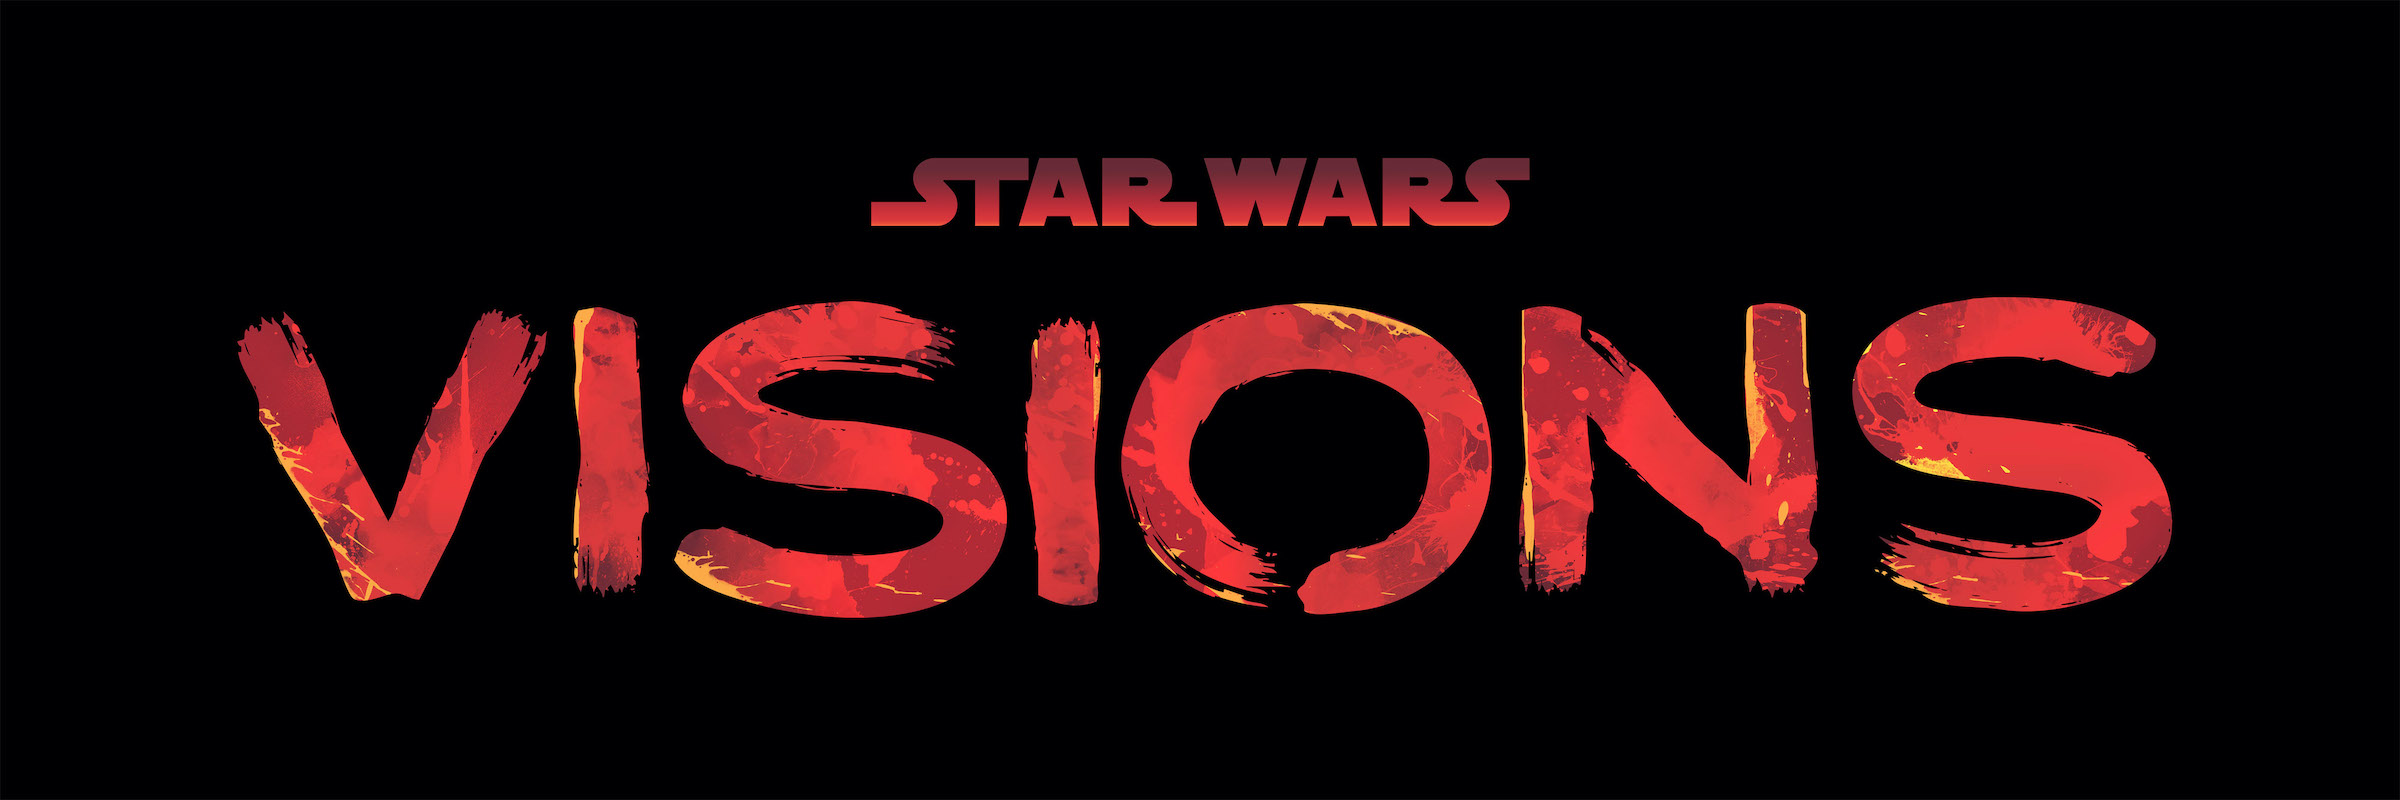 Disney+ releases teaser key art for `Star Wars: Visions` volume 2. (key art and images © and courtesy of Disney Media & Entertainment Distribution)